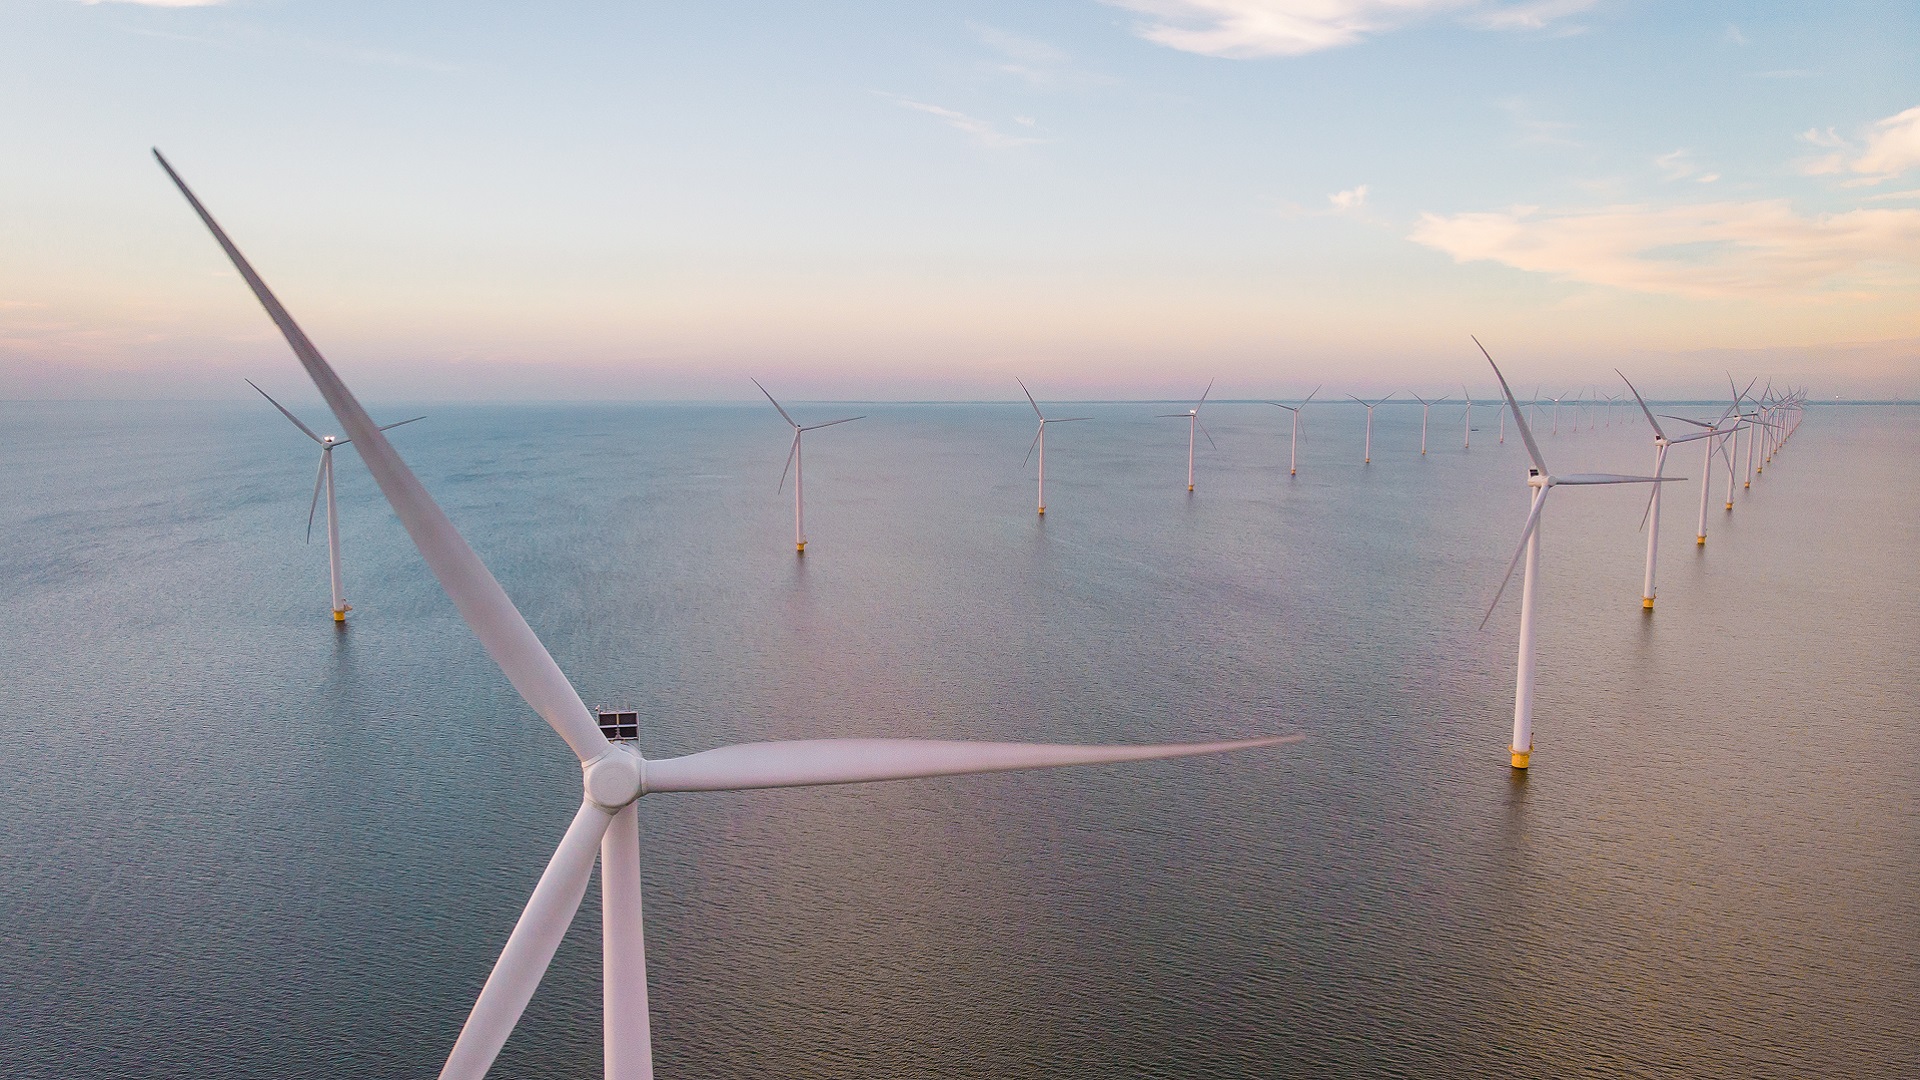 Revenue stacking: Getting the balance right for fixed-bottom offshore wind